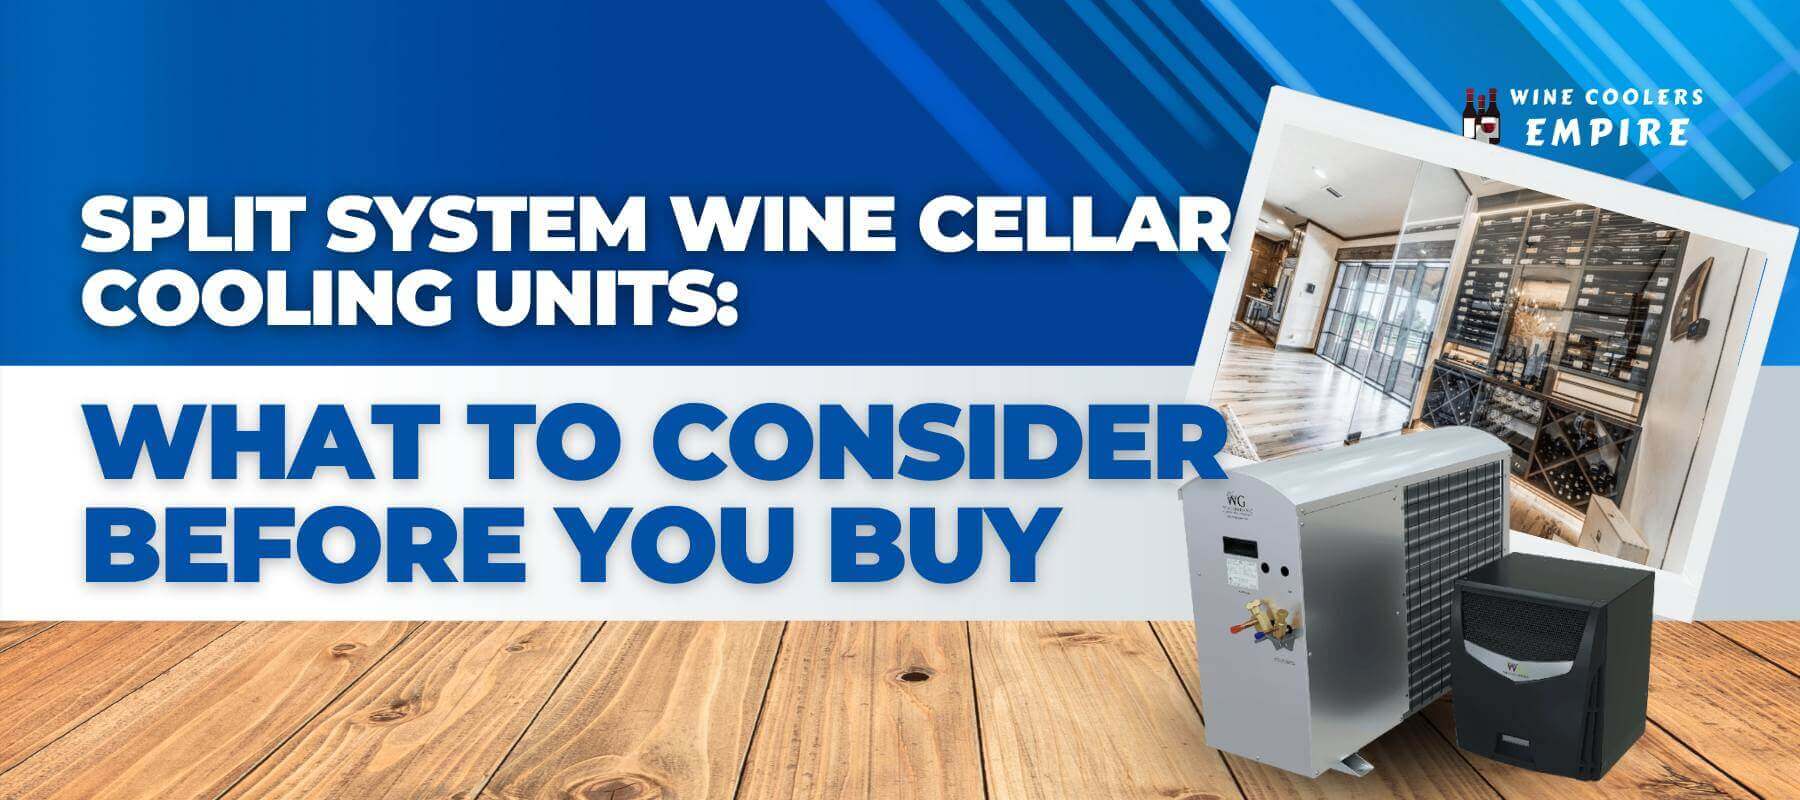 Split System Wine Cellar Cooling Units: What to Consider Before You Buy